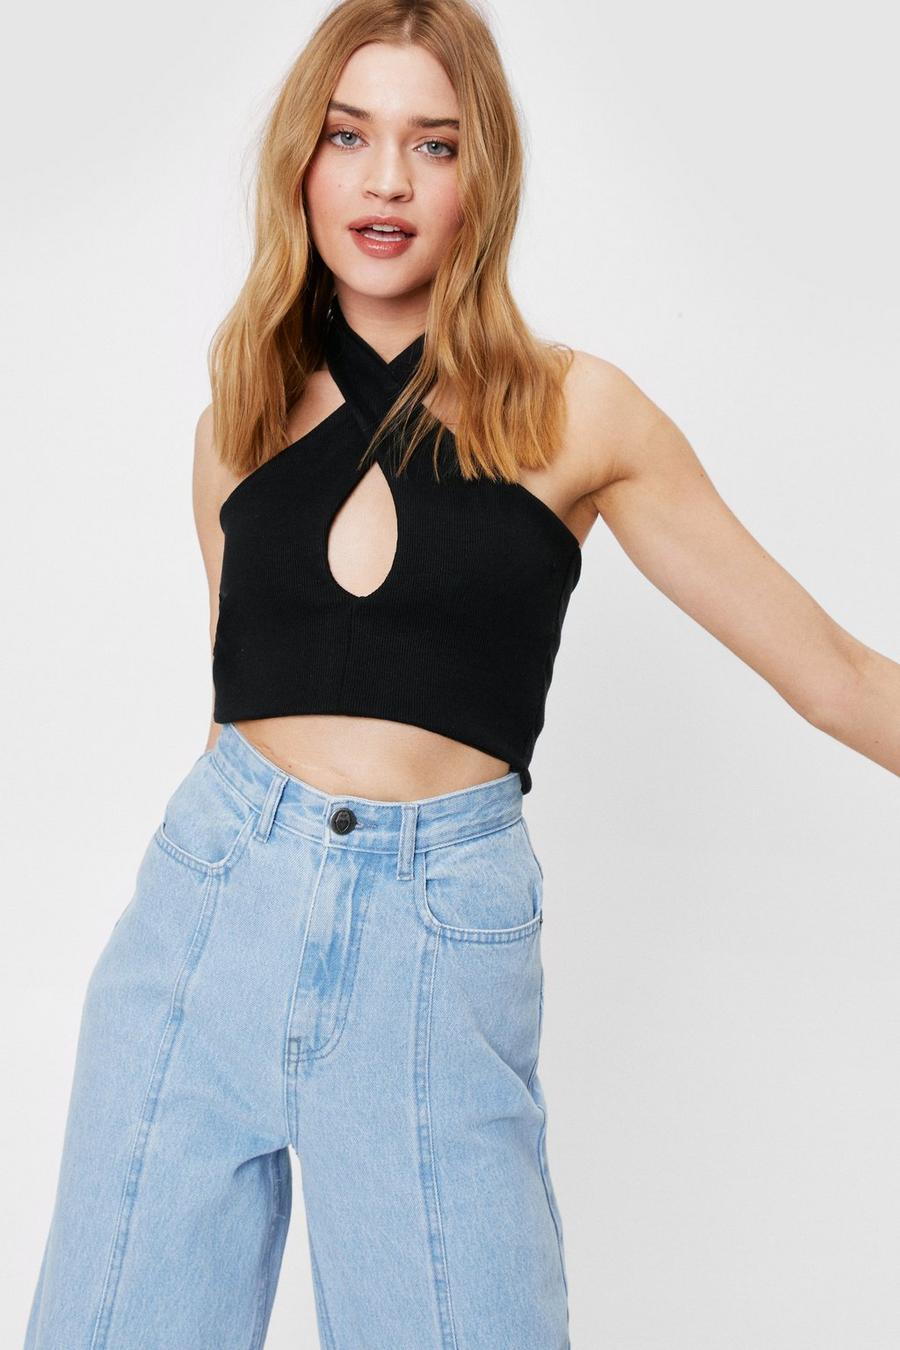 Halter Crossover Cut Out Crop Top